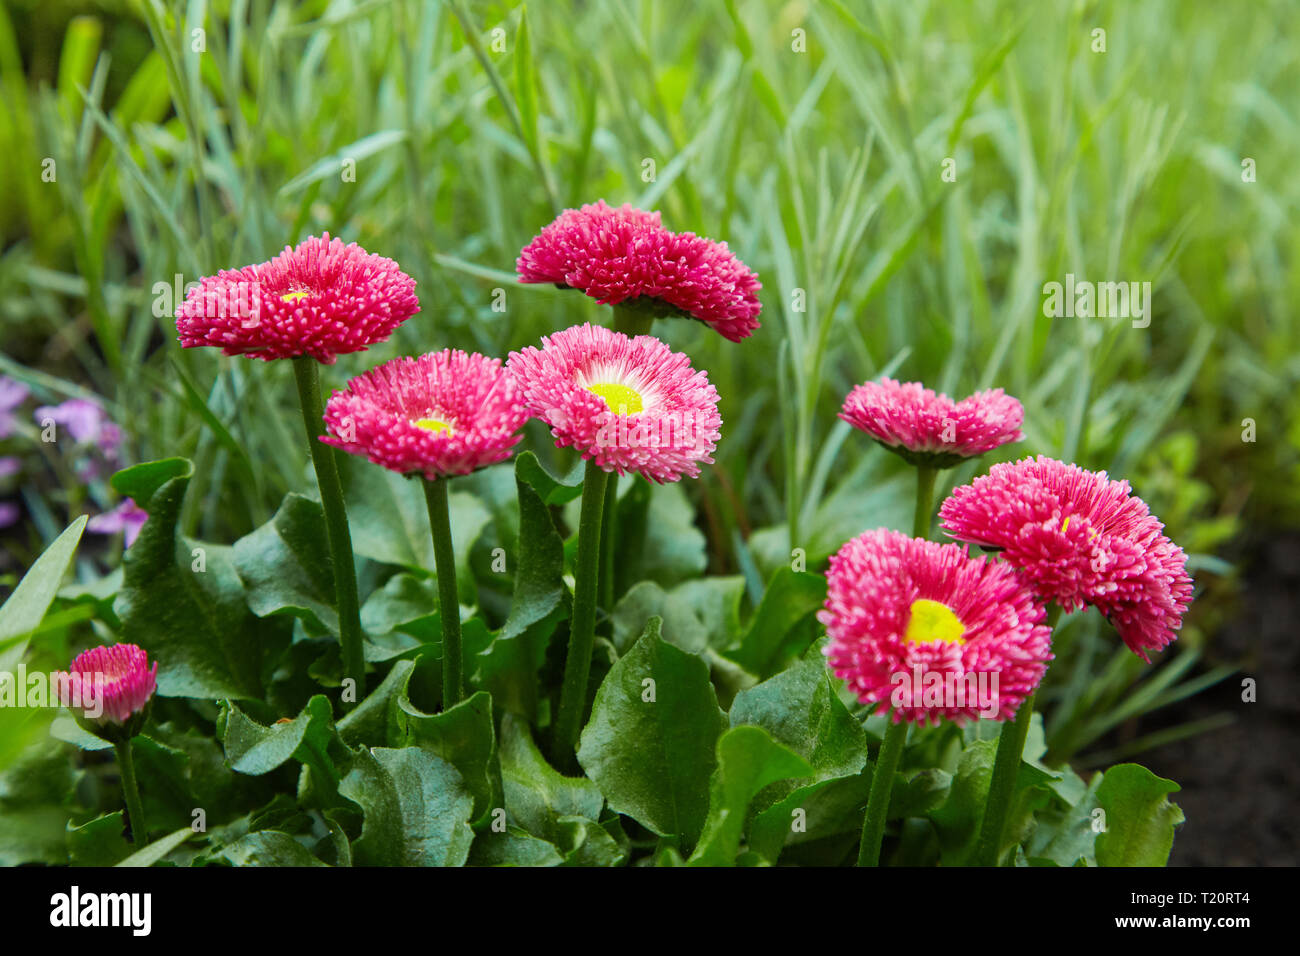 Pink English daisies - Bellis perennis - in spring garden. Bellasima rose. Blooming seedlings bunch with bright green leaves and pink flowerheads Stock Photo